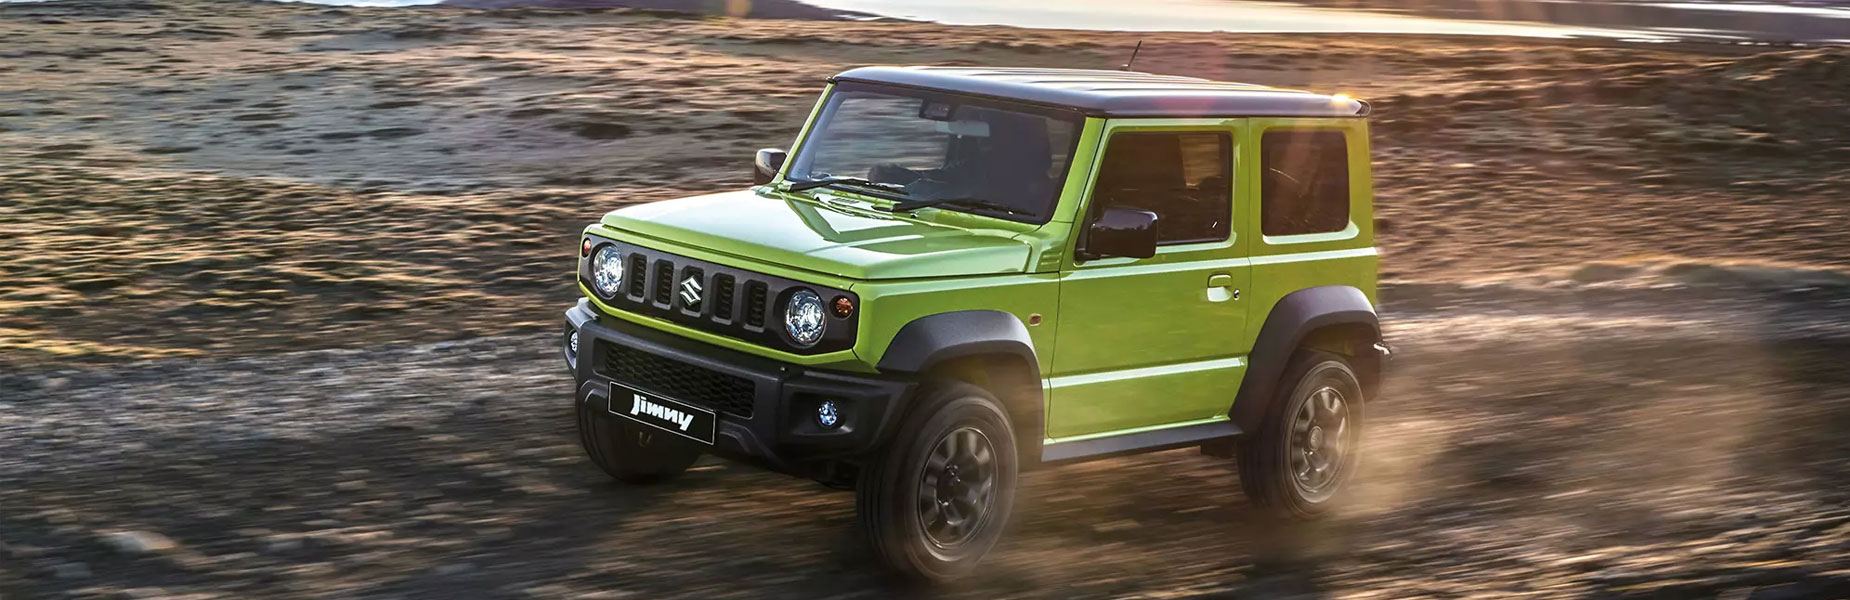 jimny accessories exterior interior off-roading for